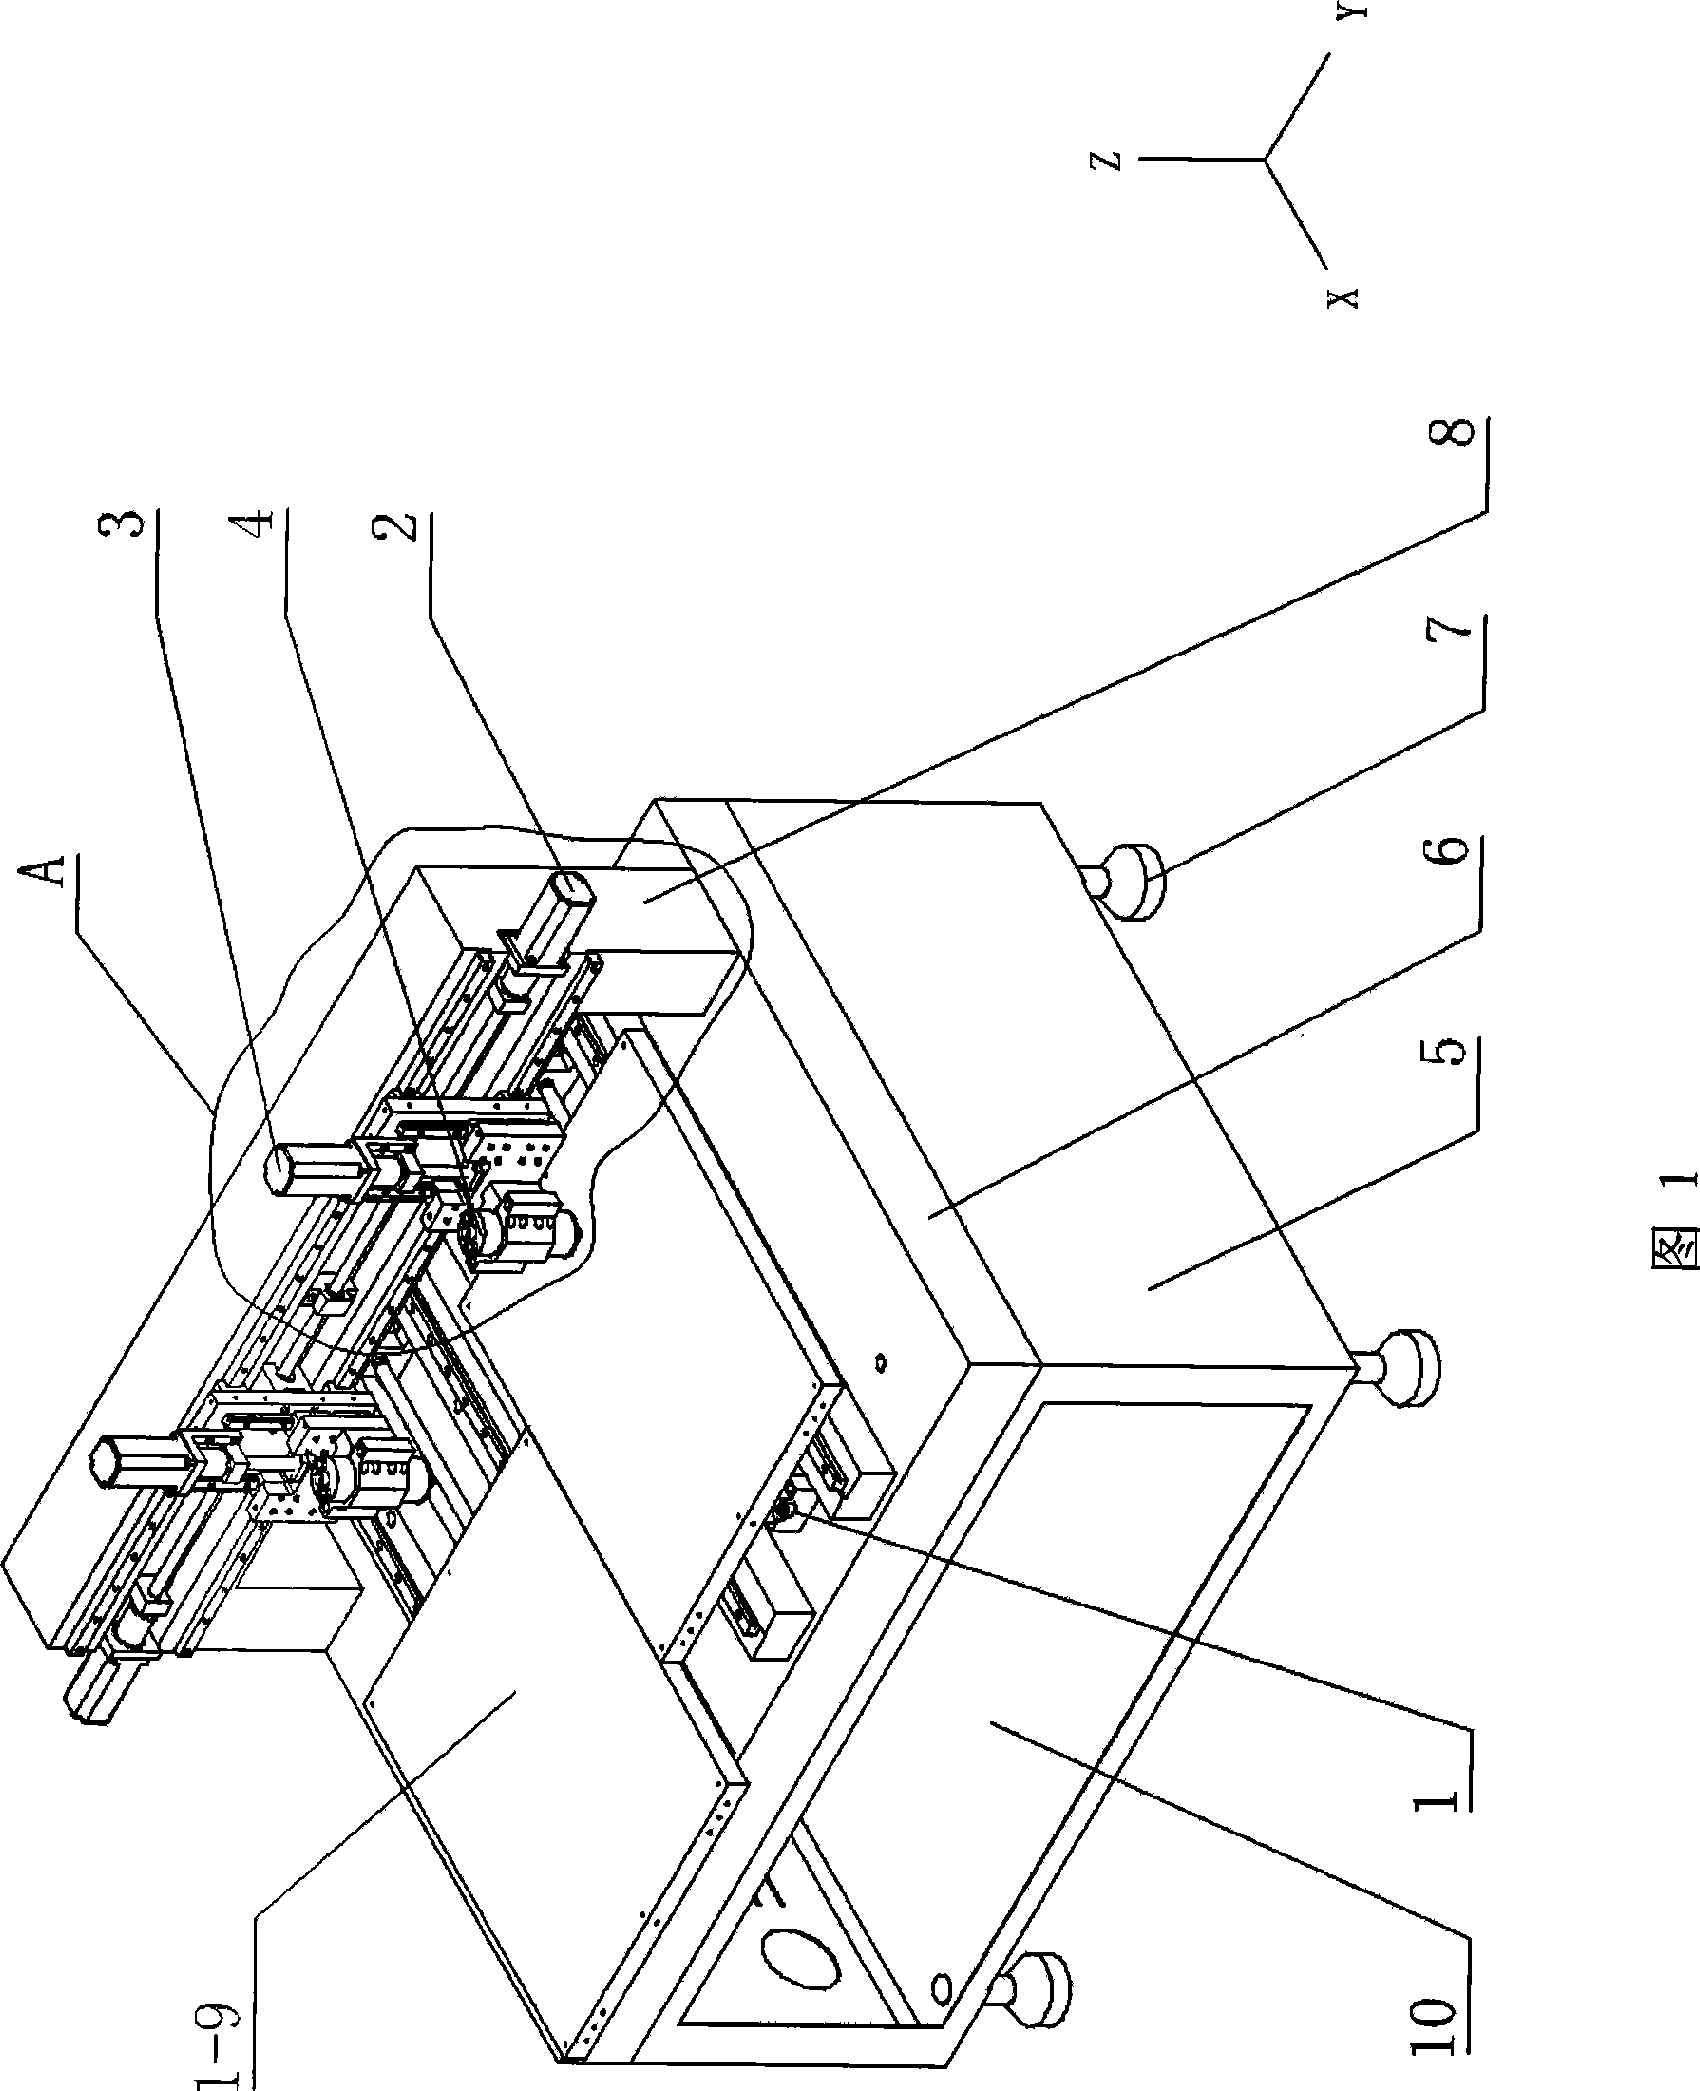 Numerical control drilling-milling apparatus having a plurality of independent process systems